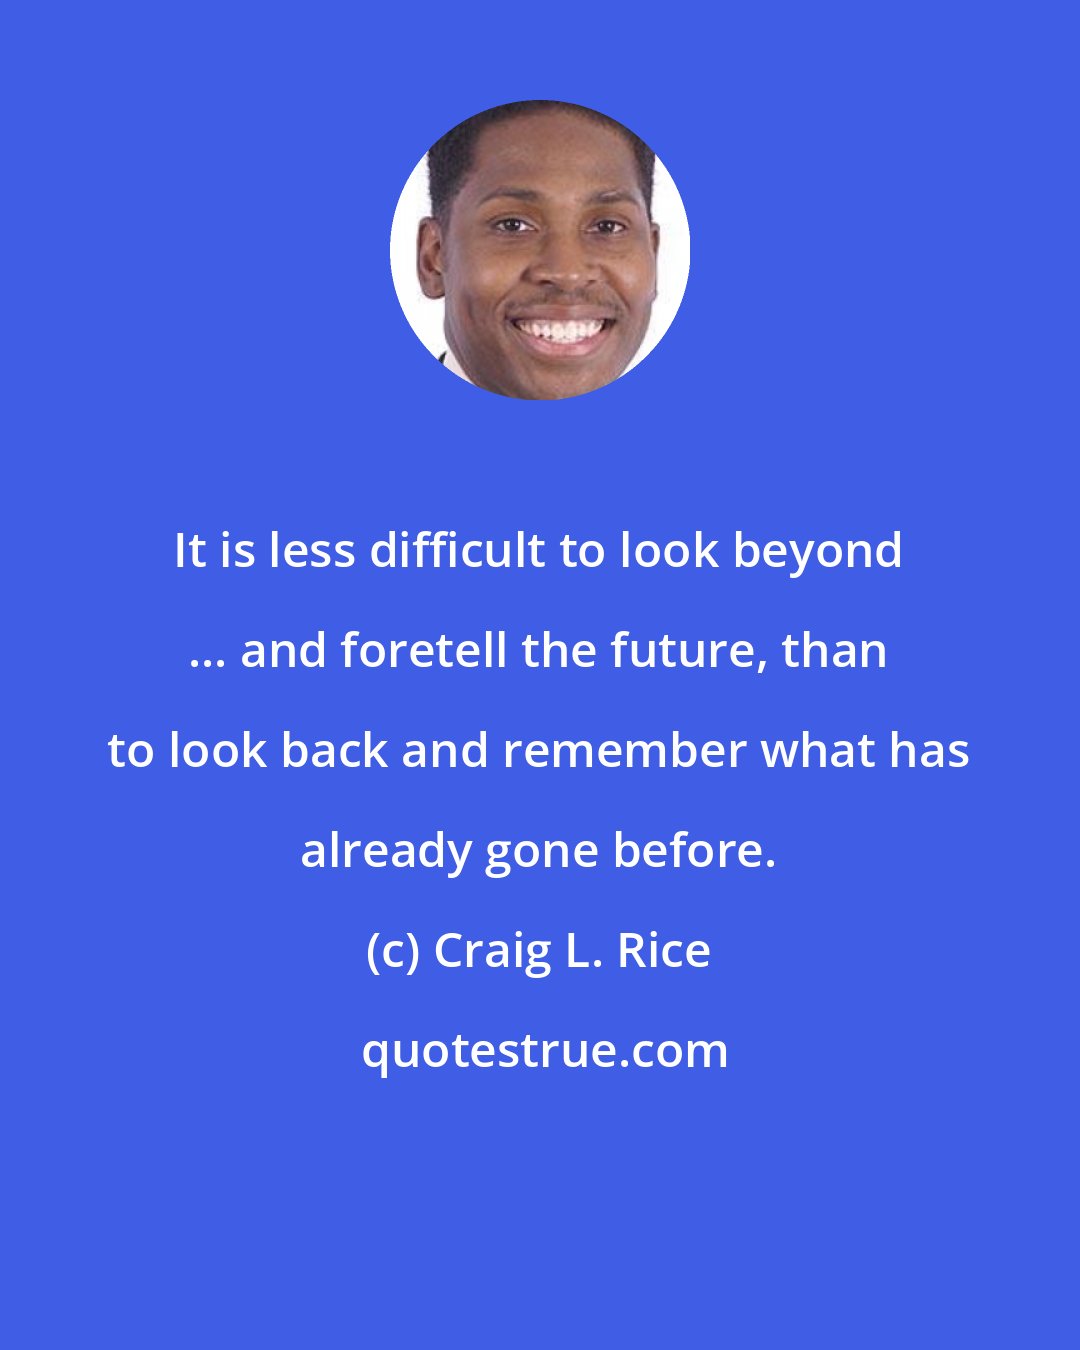 Craig L. Rice: It is less difficult to look beyond ... and foretell the future, than to look back and remember what has already gone before.